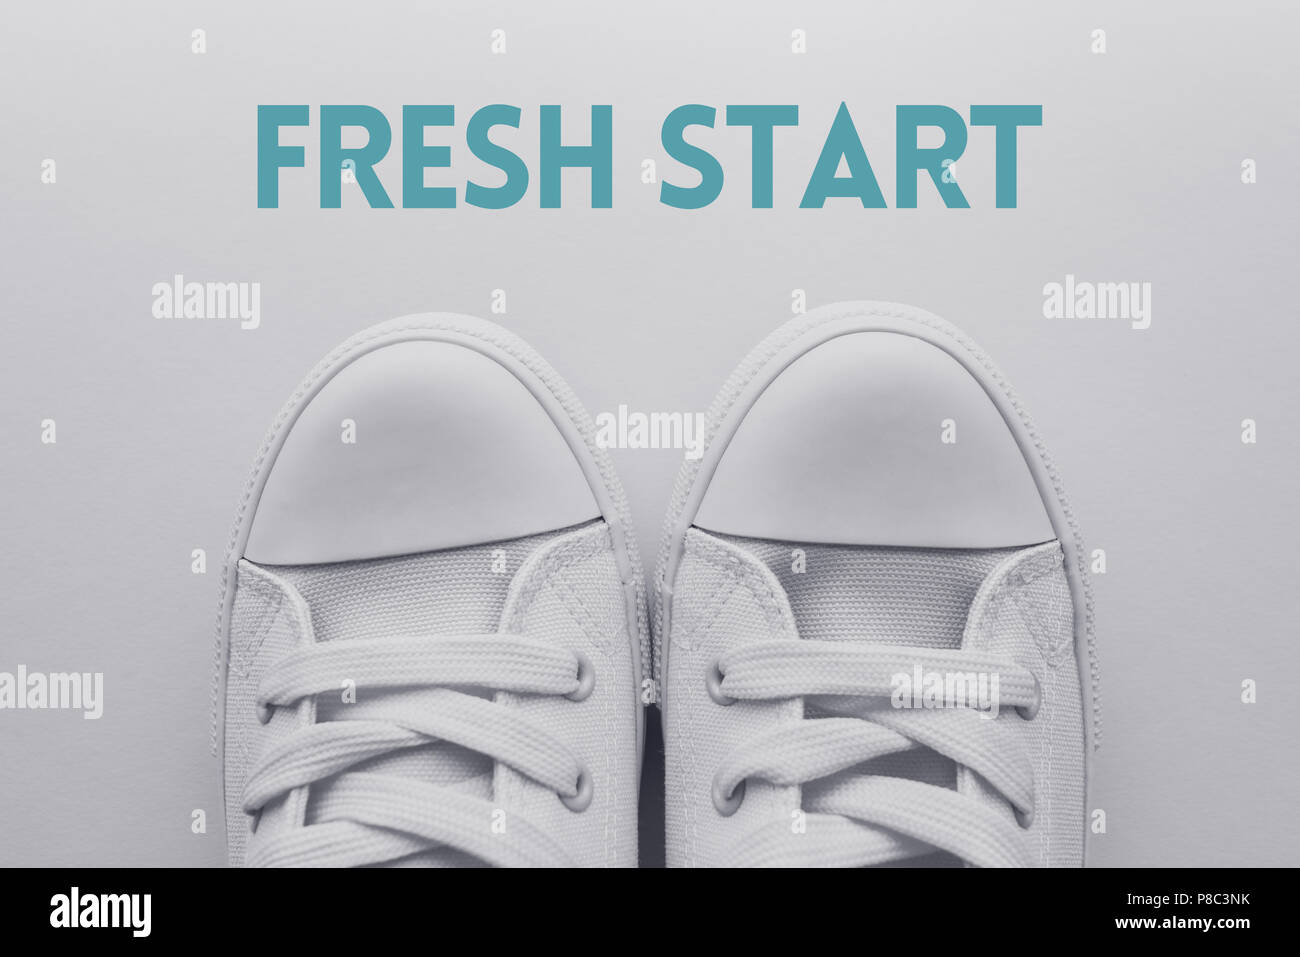 Fresh start and new beginning concept, youth style sneakers standing over title Stock Photo